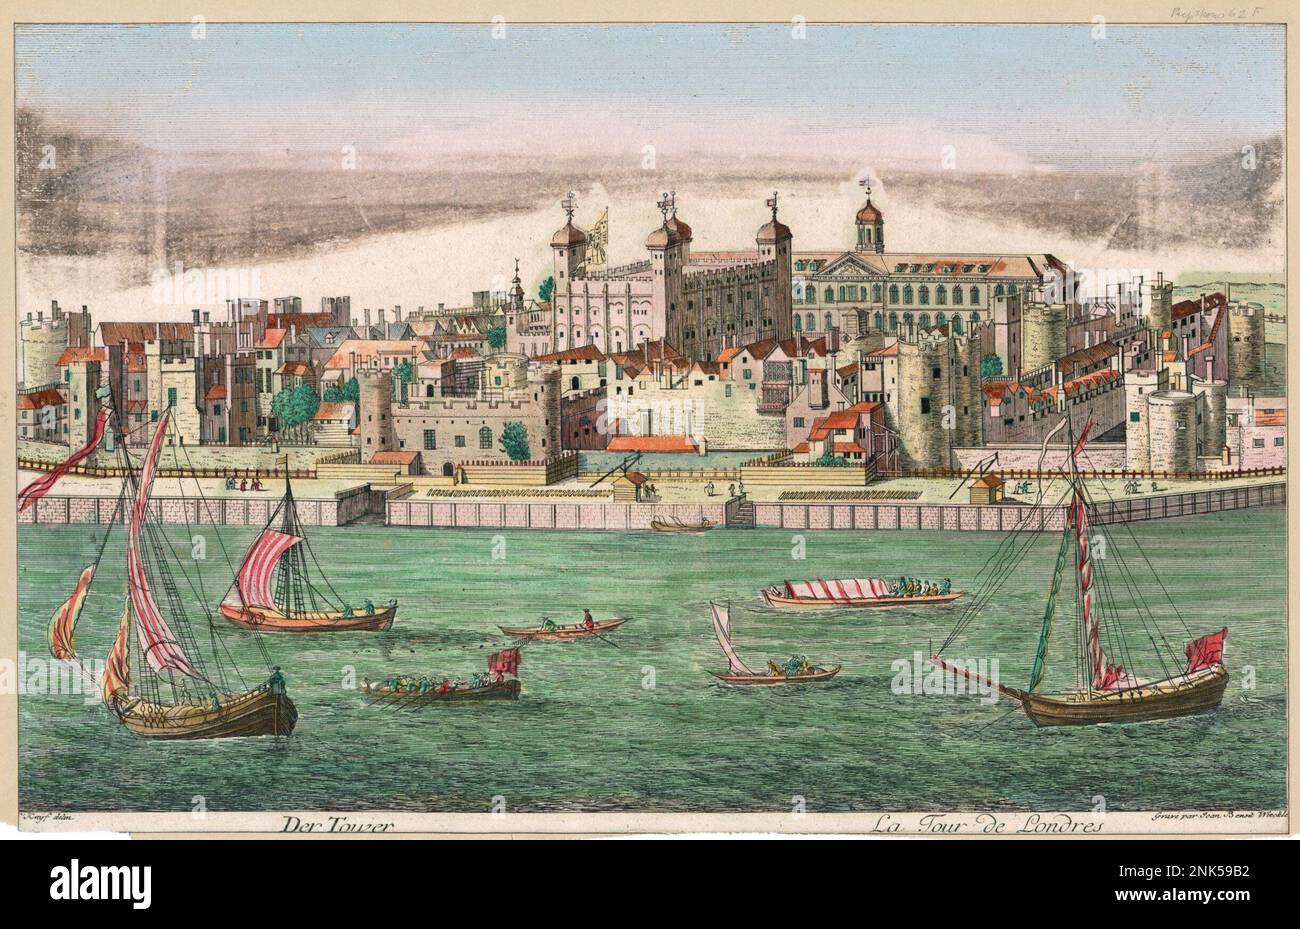 Tower of London England, vintage illustration from the 1700s Stock Photo